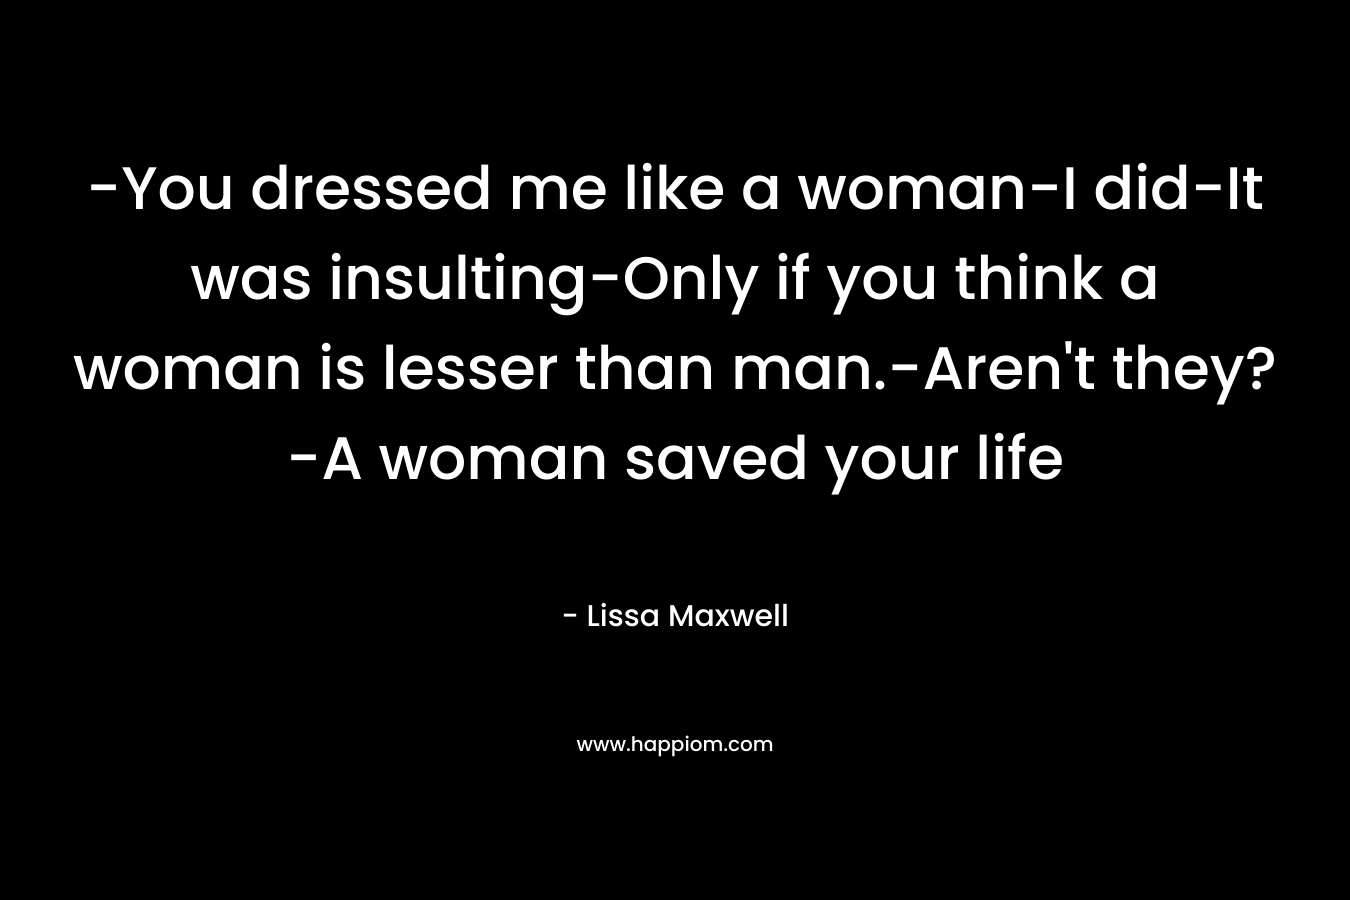 -You dressed me like a woman-I did-It was insulting-Only if you think a woman is lesser than man.-Aren't they?-A woman saved your life